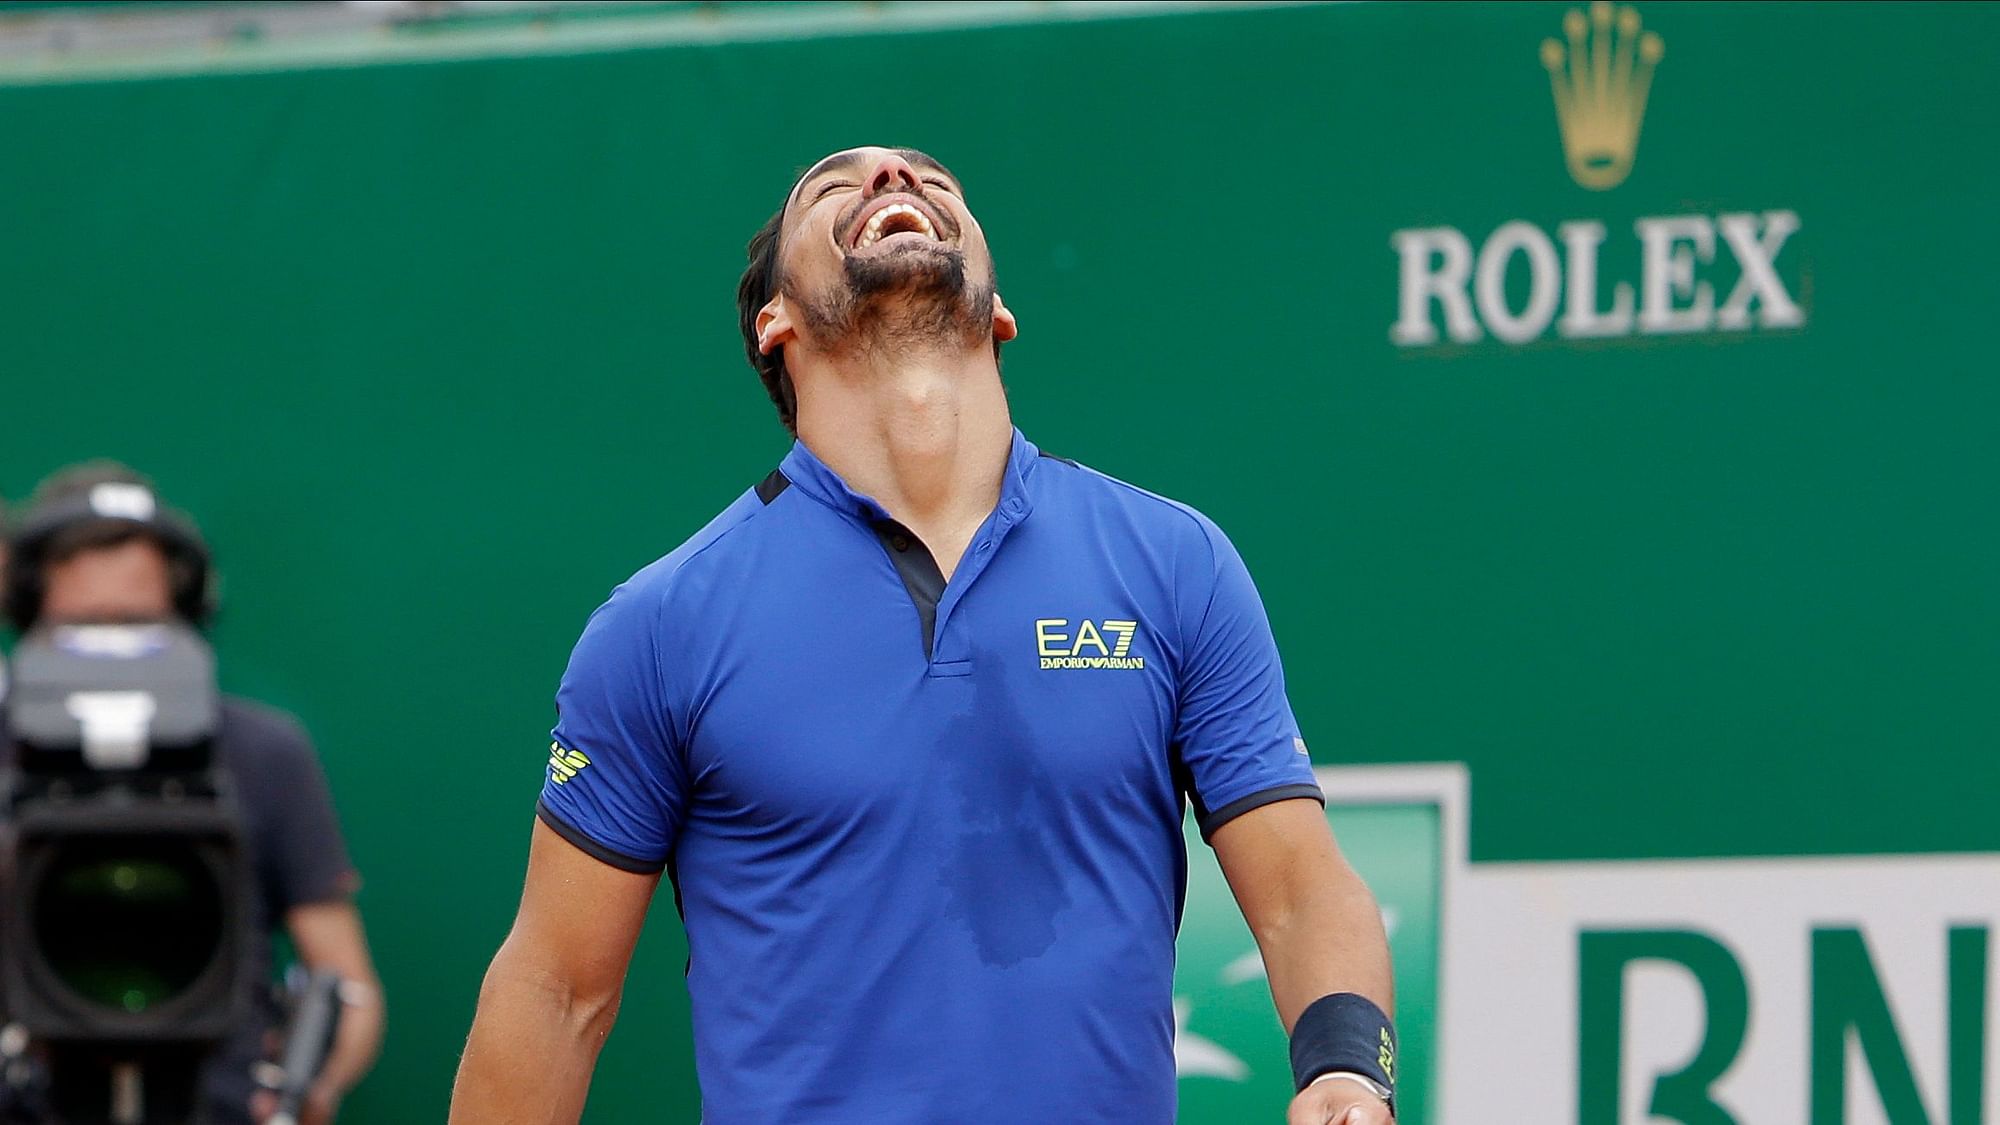 Italy’s Fabio Fognini celebrates after defeating Spain’s Rafael Nadal during their semifinal match of the Monte Carlo Tennis Masters tournament in Monaco, Saturday, April, 20, 2019.&nbsp;